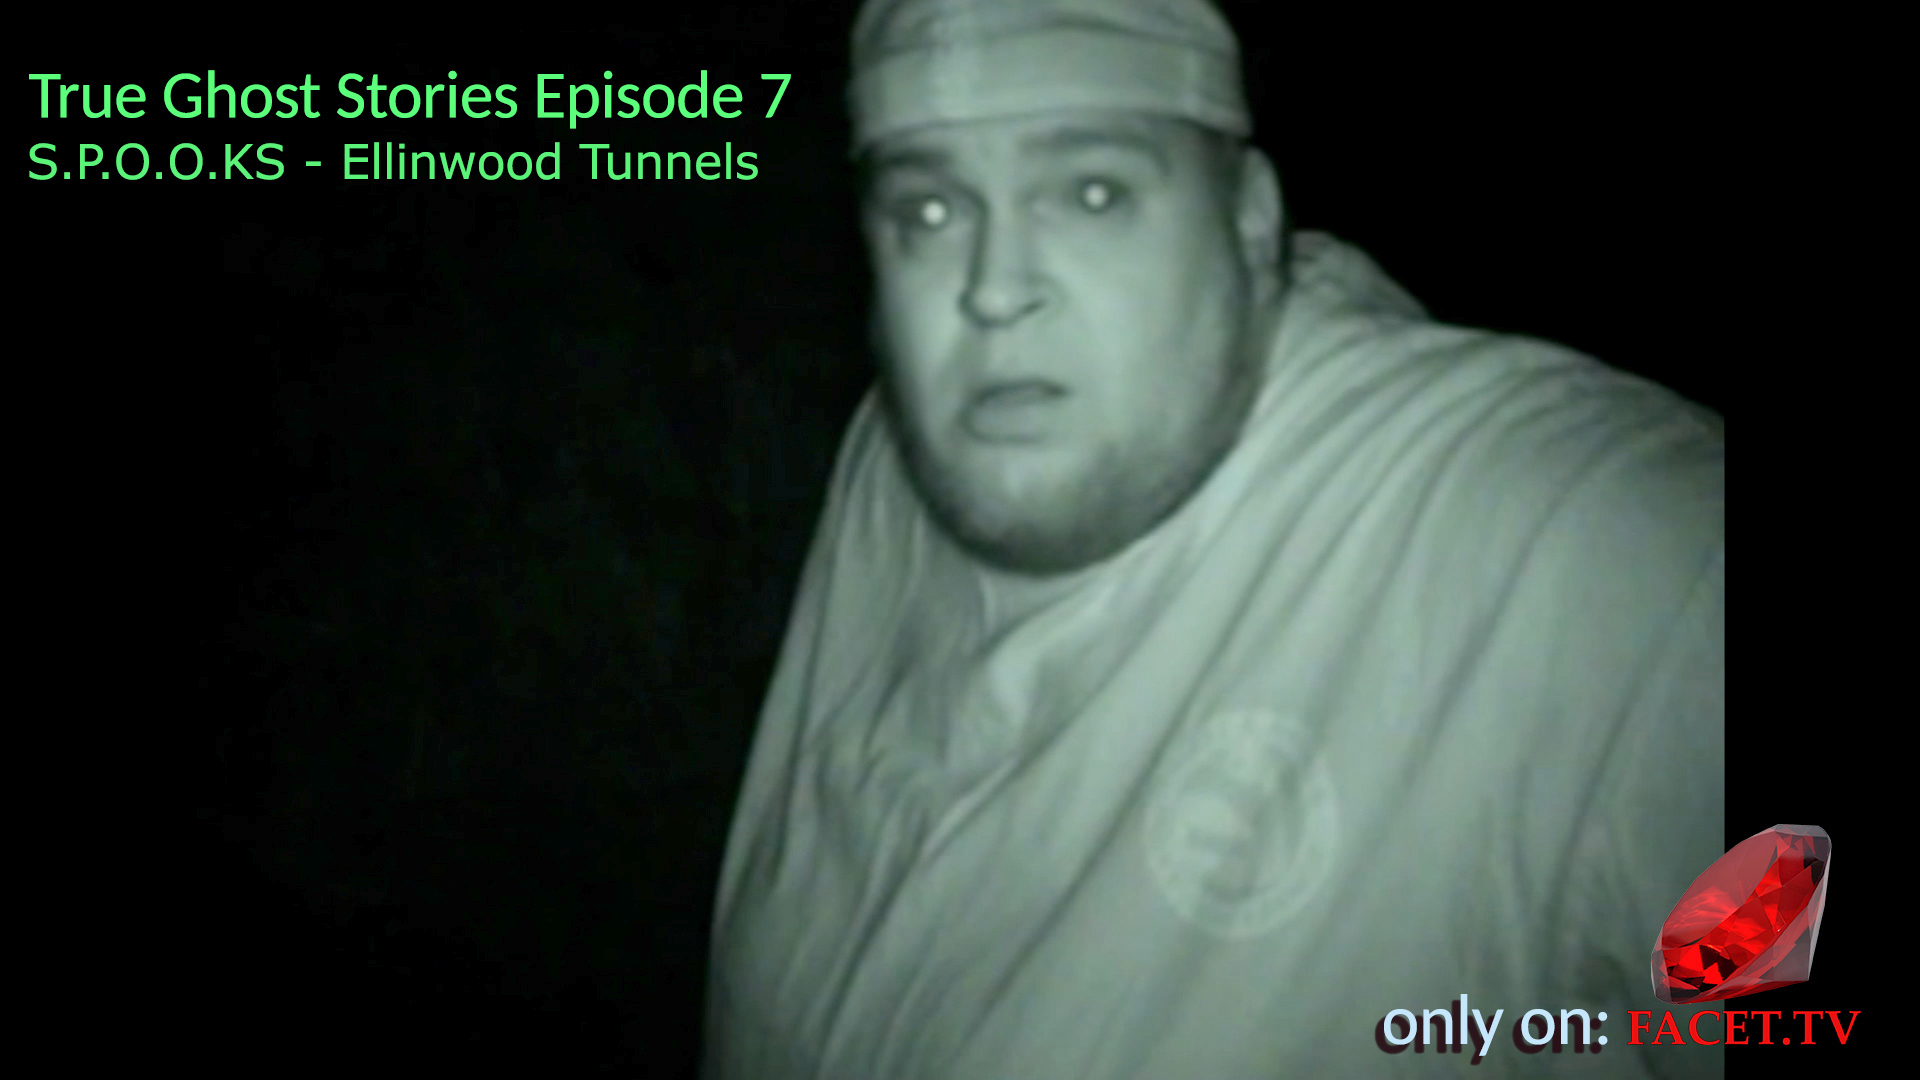 Photo for True Ghost Stories Episode Seven - S.P.O.O.KS Ellinwood Tunnels on ViewStub